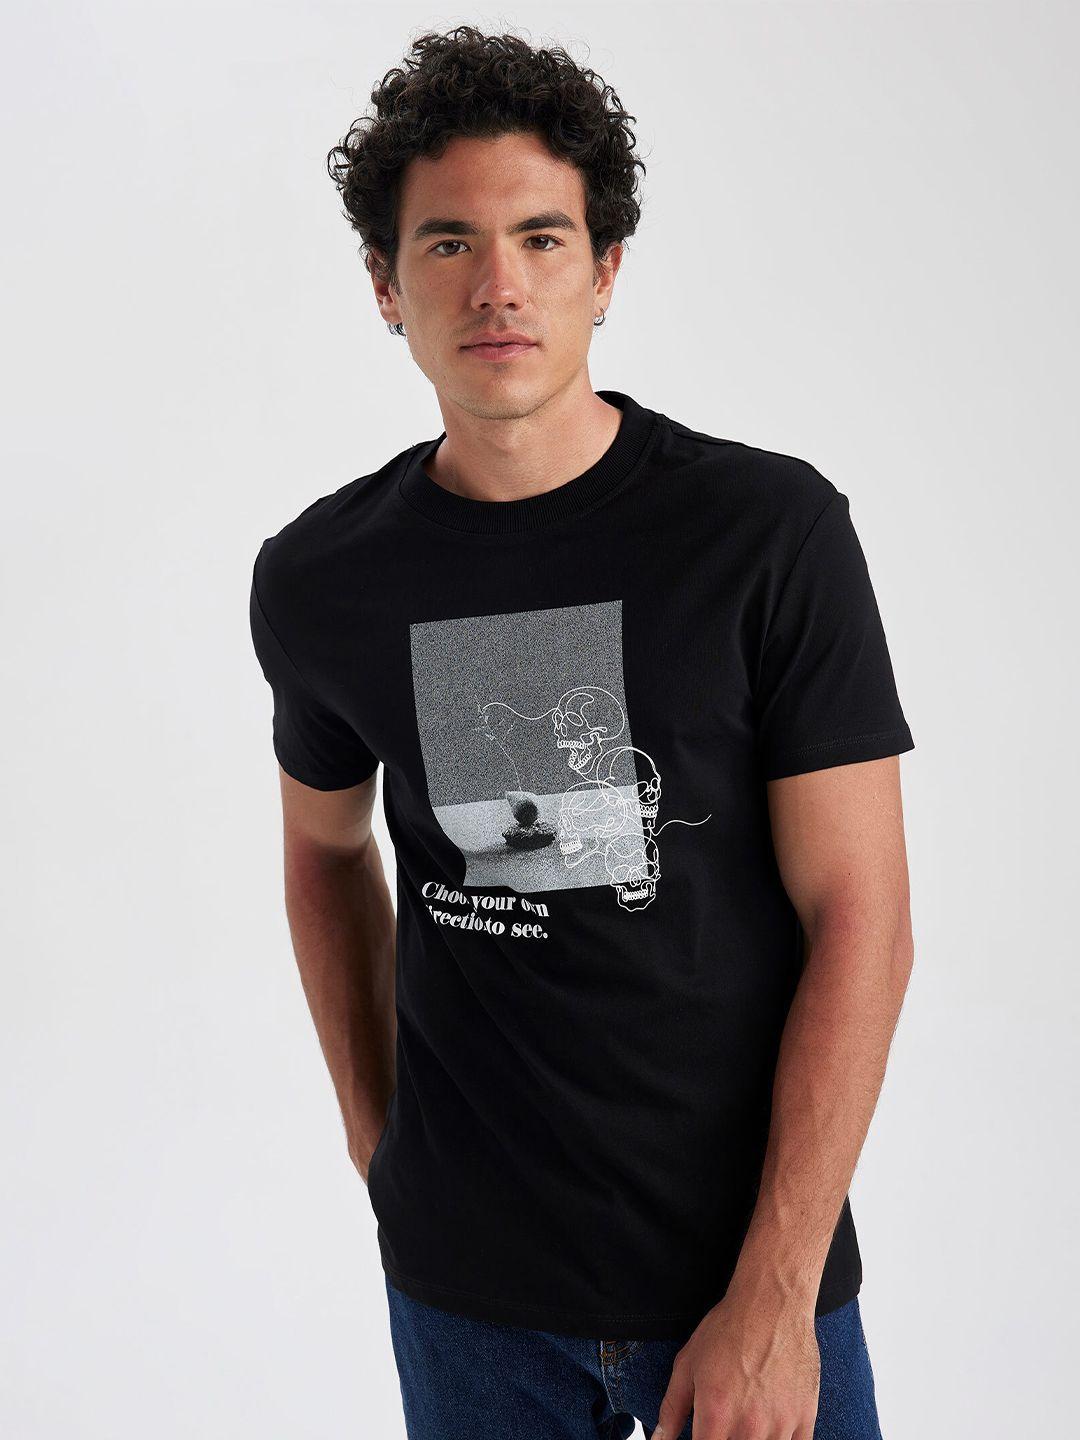 defacto typography printed pure cotton t-shirt